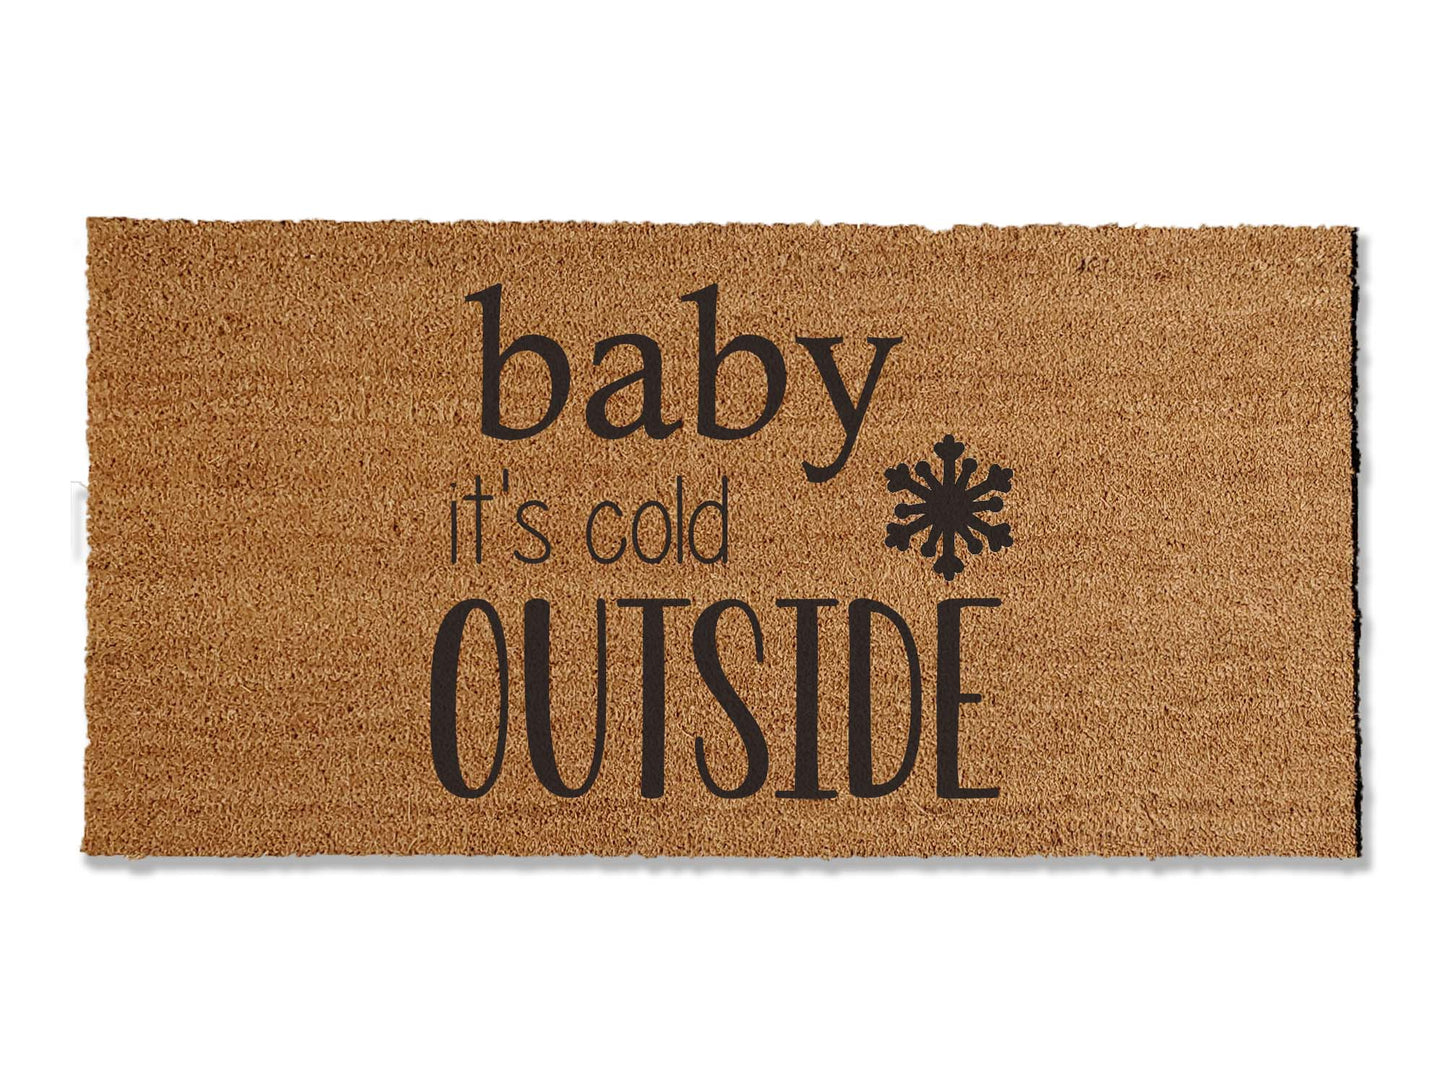 A coir doormat that is 24 inches by 48 inches and has a the text baby it's cold outside with a snowflake painted on it.